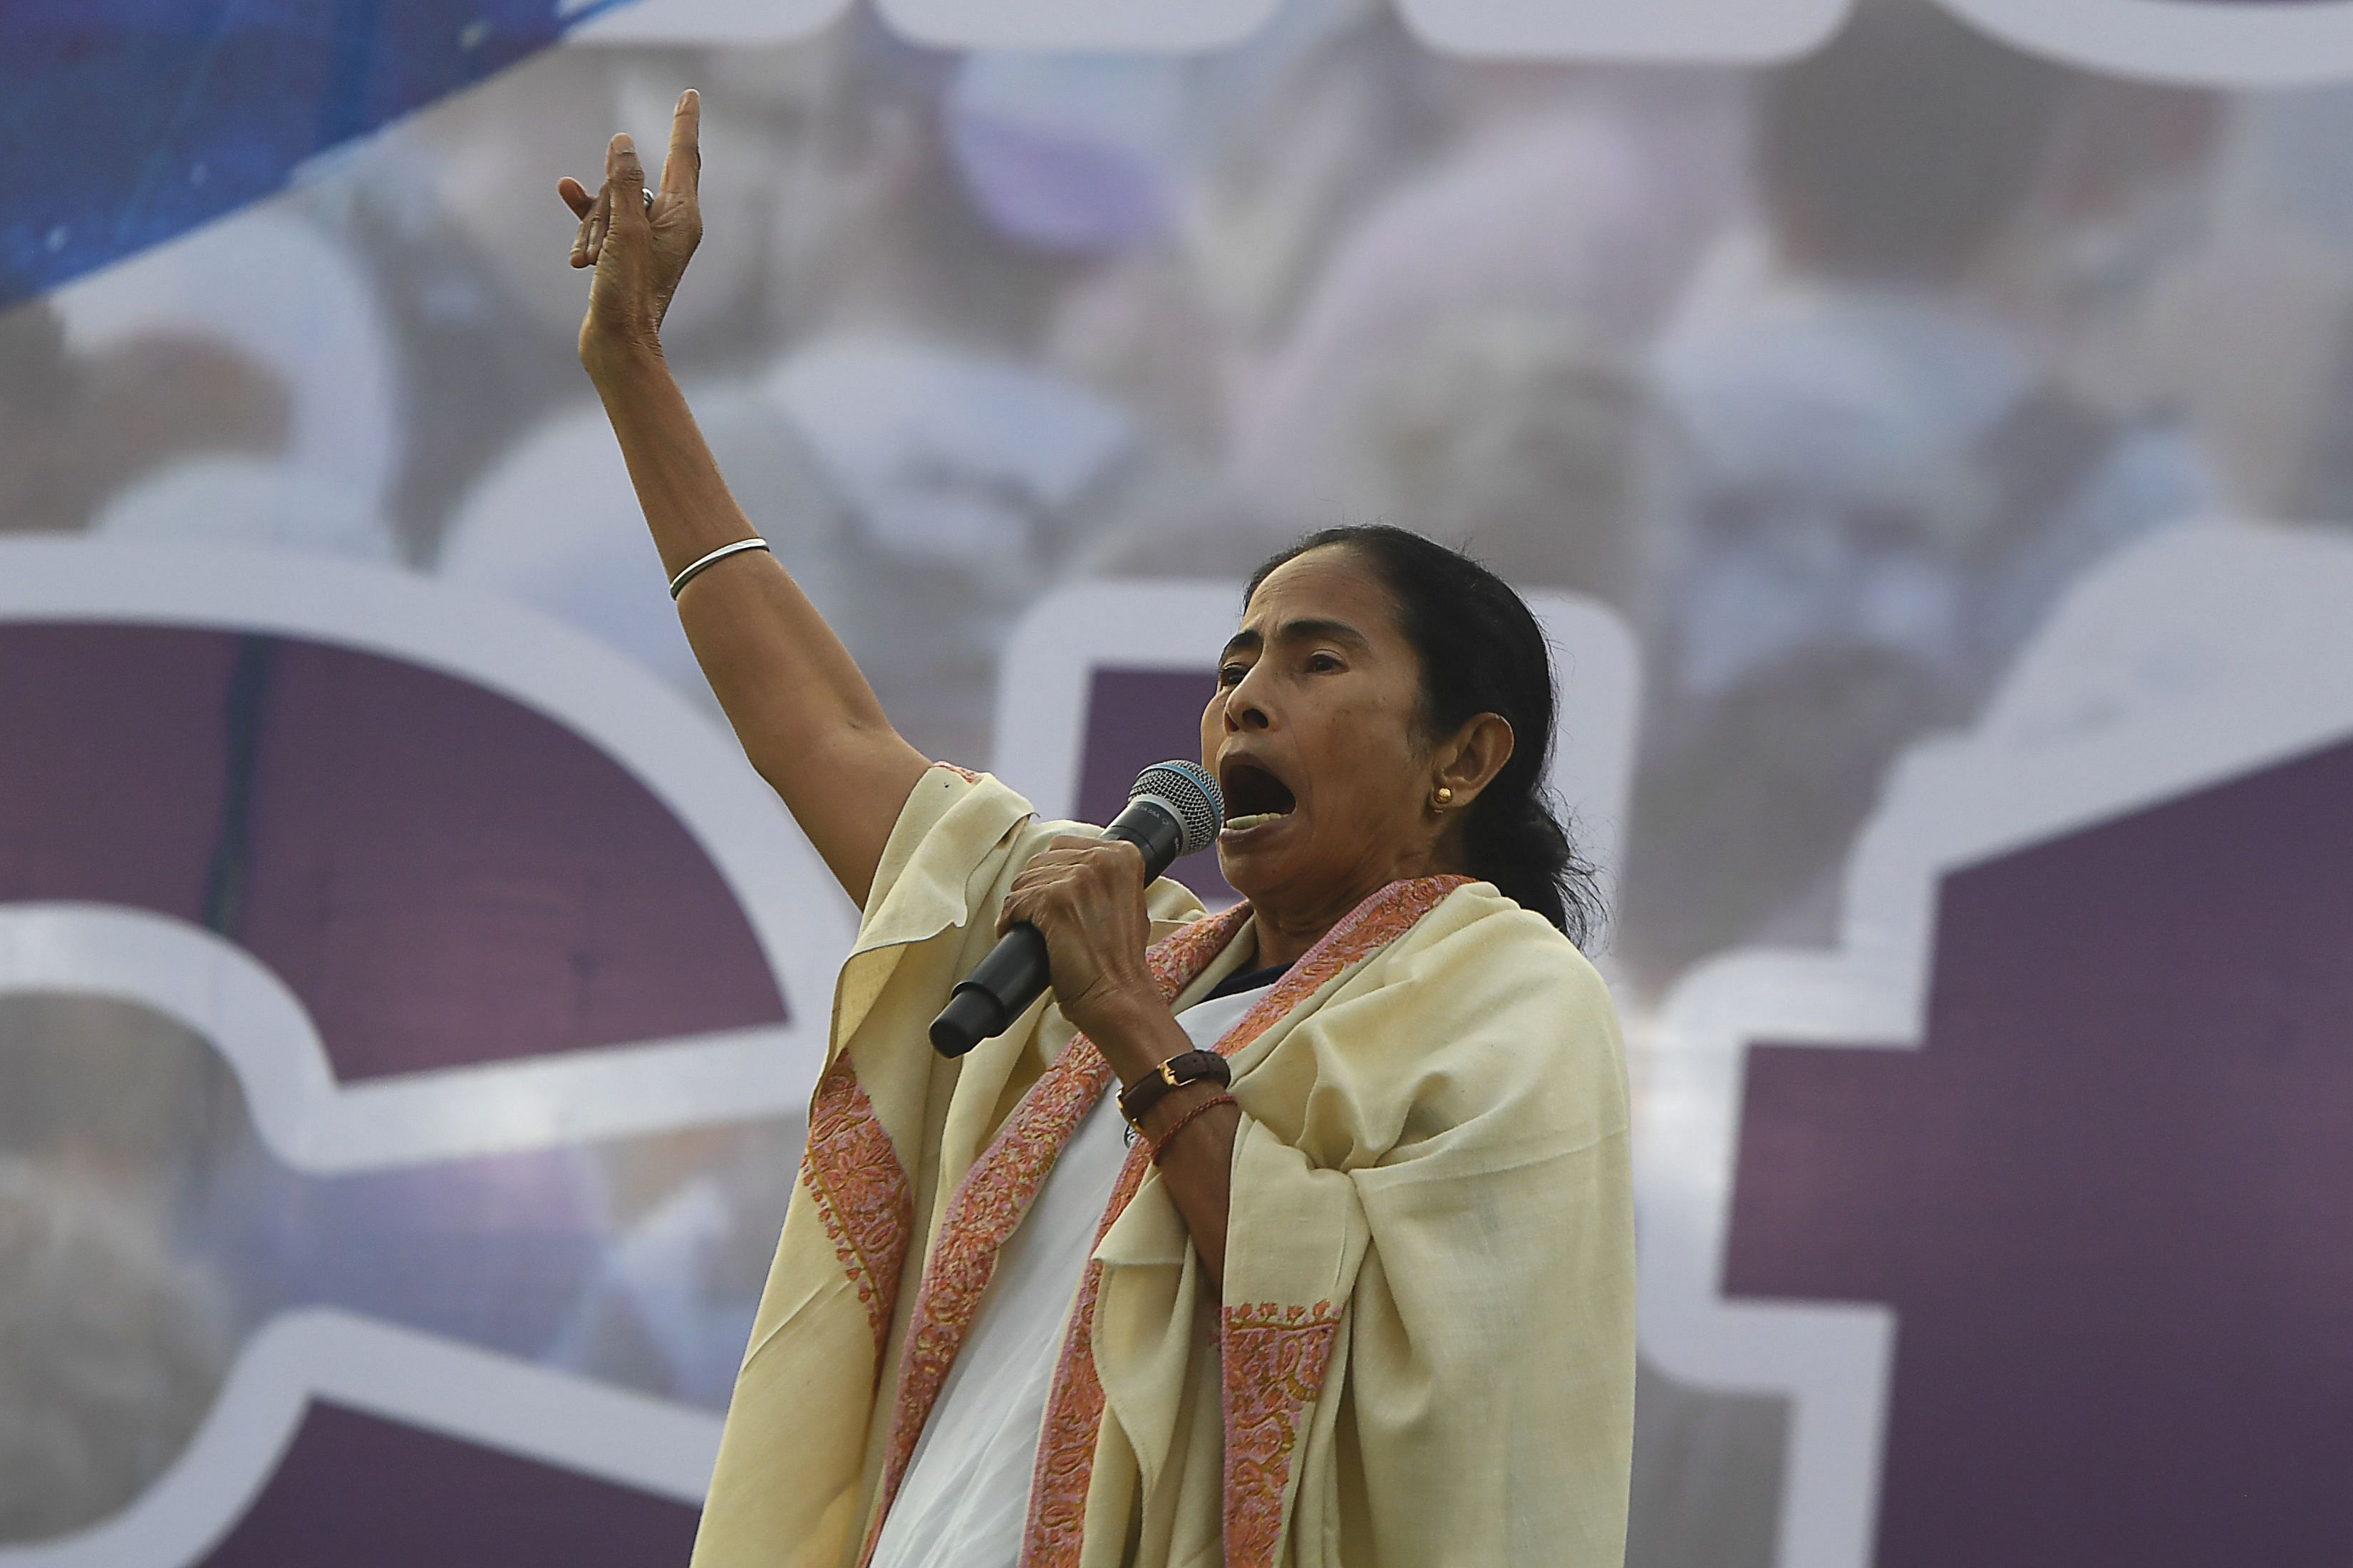 Chief minister of West Bengal state and leader of the Trinamool Congress (TMC) Mamata Banerjee. (PTI Photo)